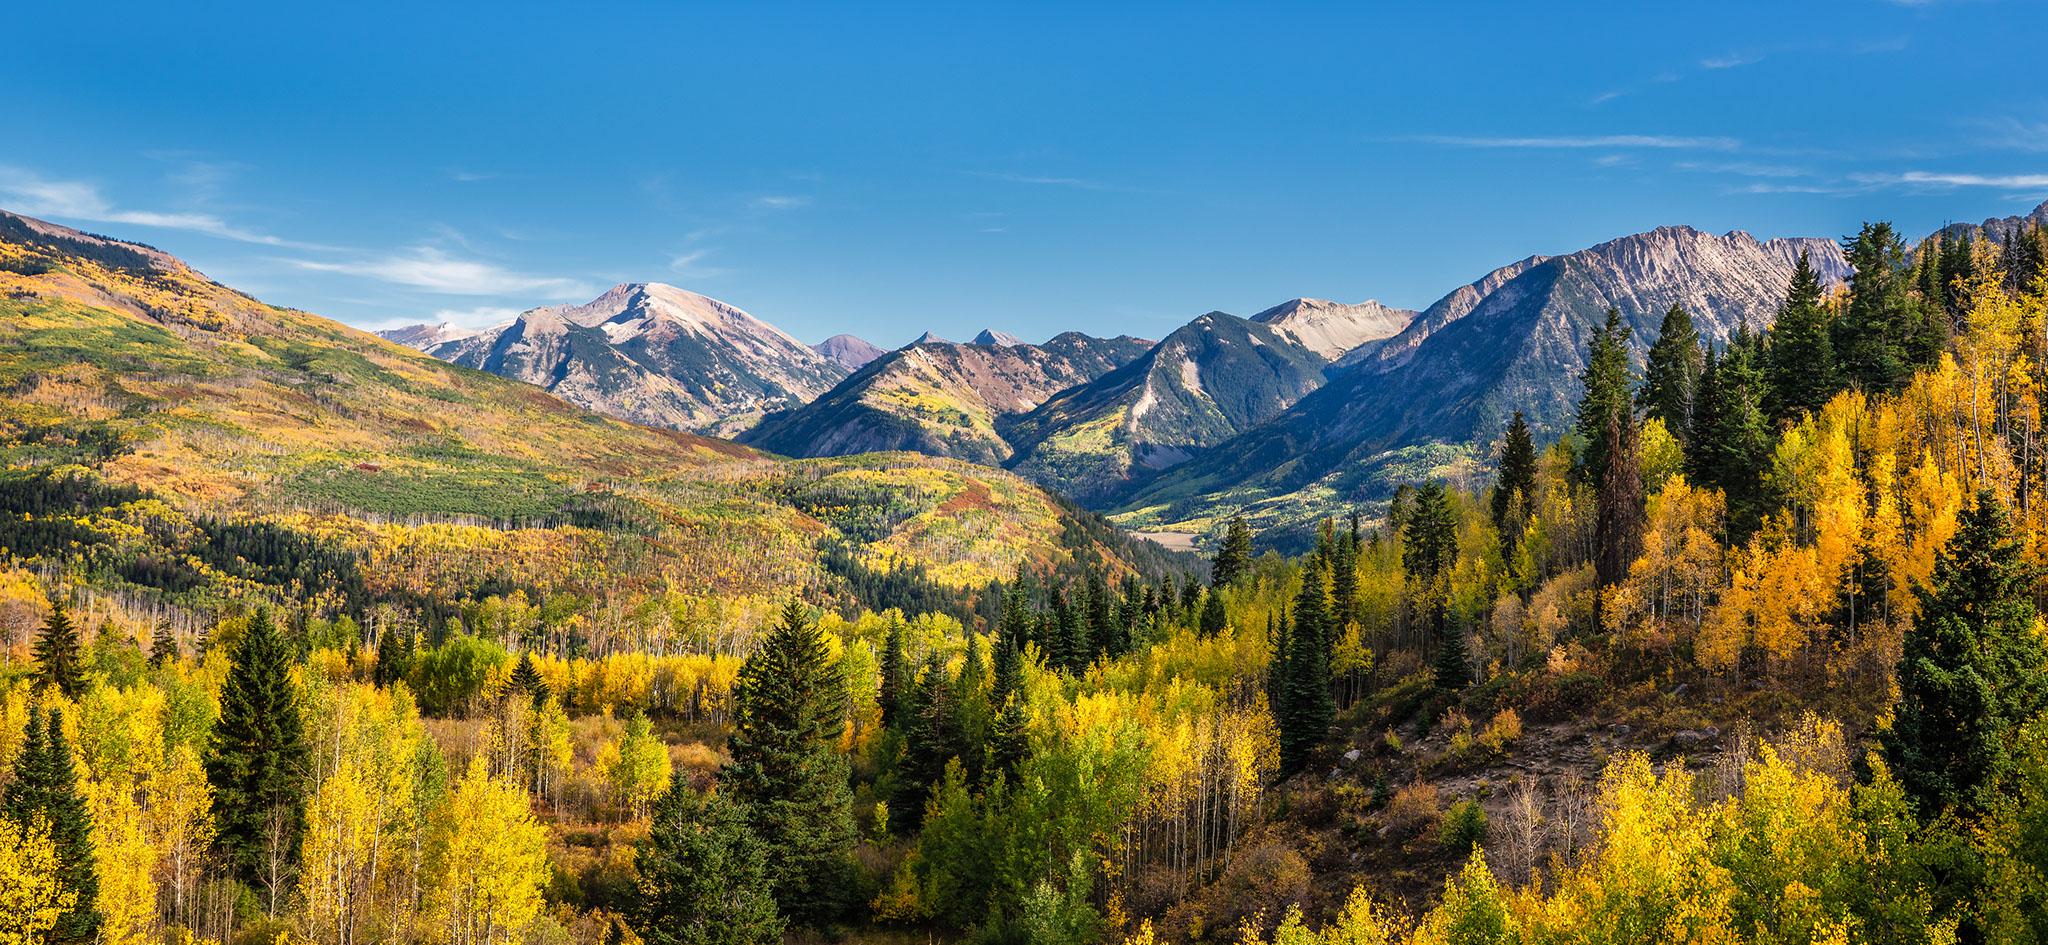 Scenic panorama picture of an autumn Colorado mountainscape in hues of green and gold and a clear blue sky